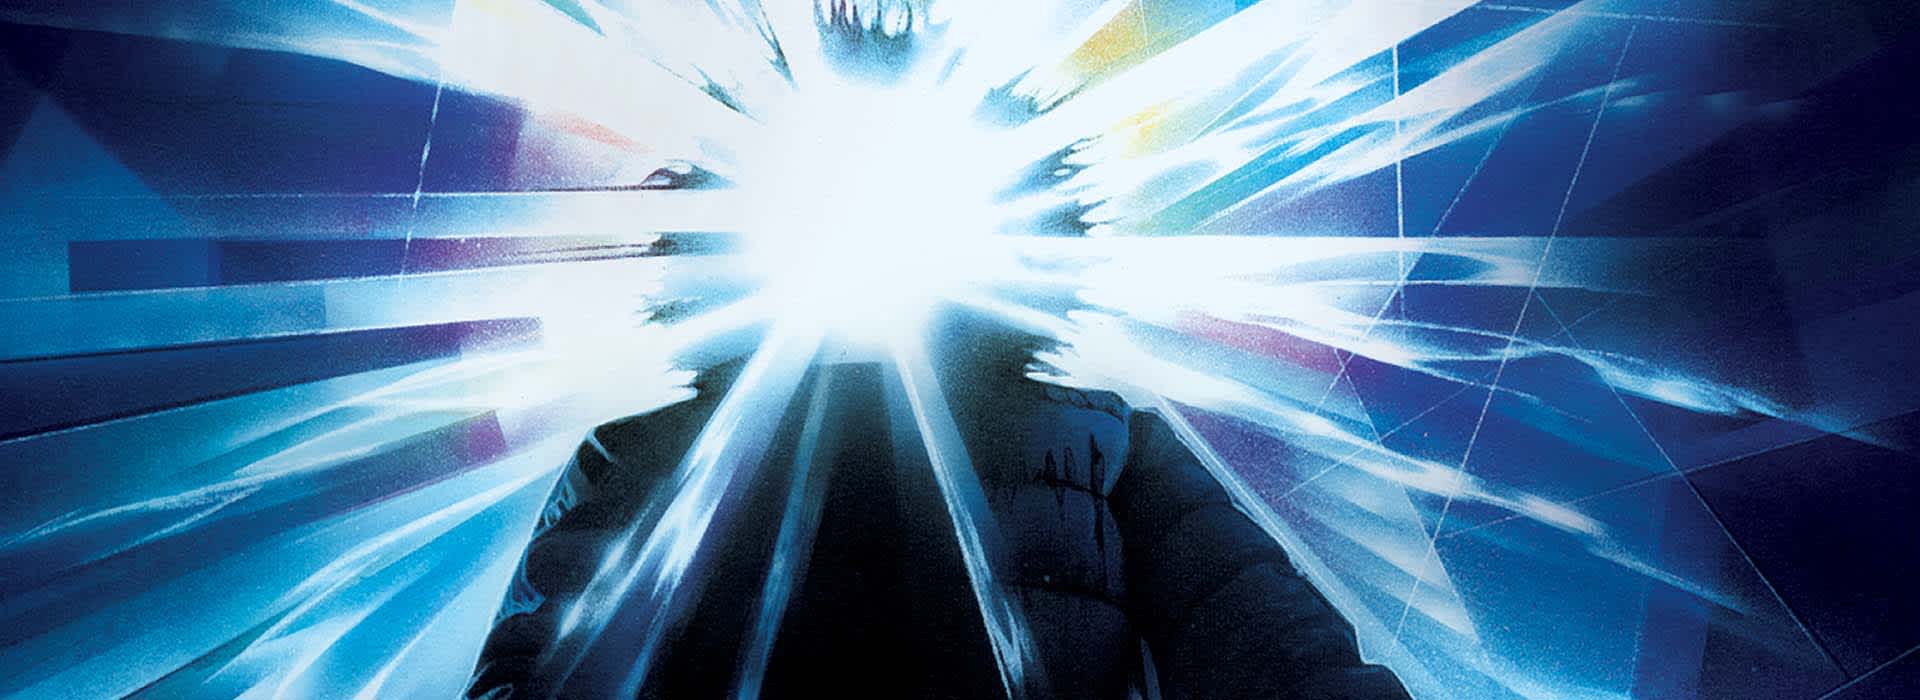 John Carpenter's Sci-Fi Horror Film 'The Thing' Was Ahead Of Its Time